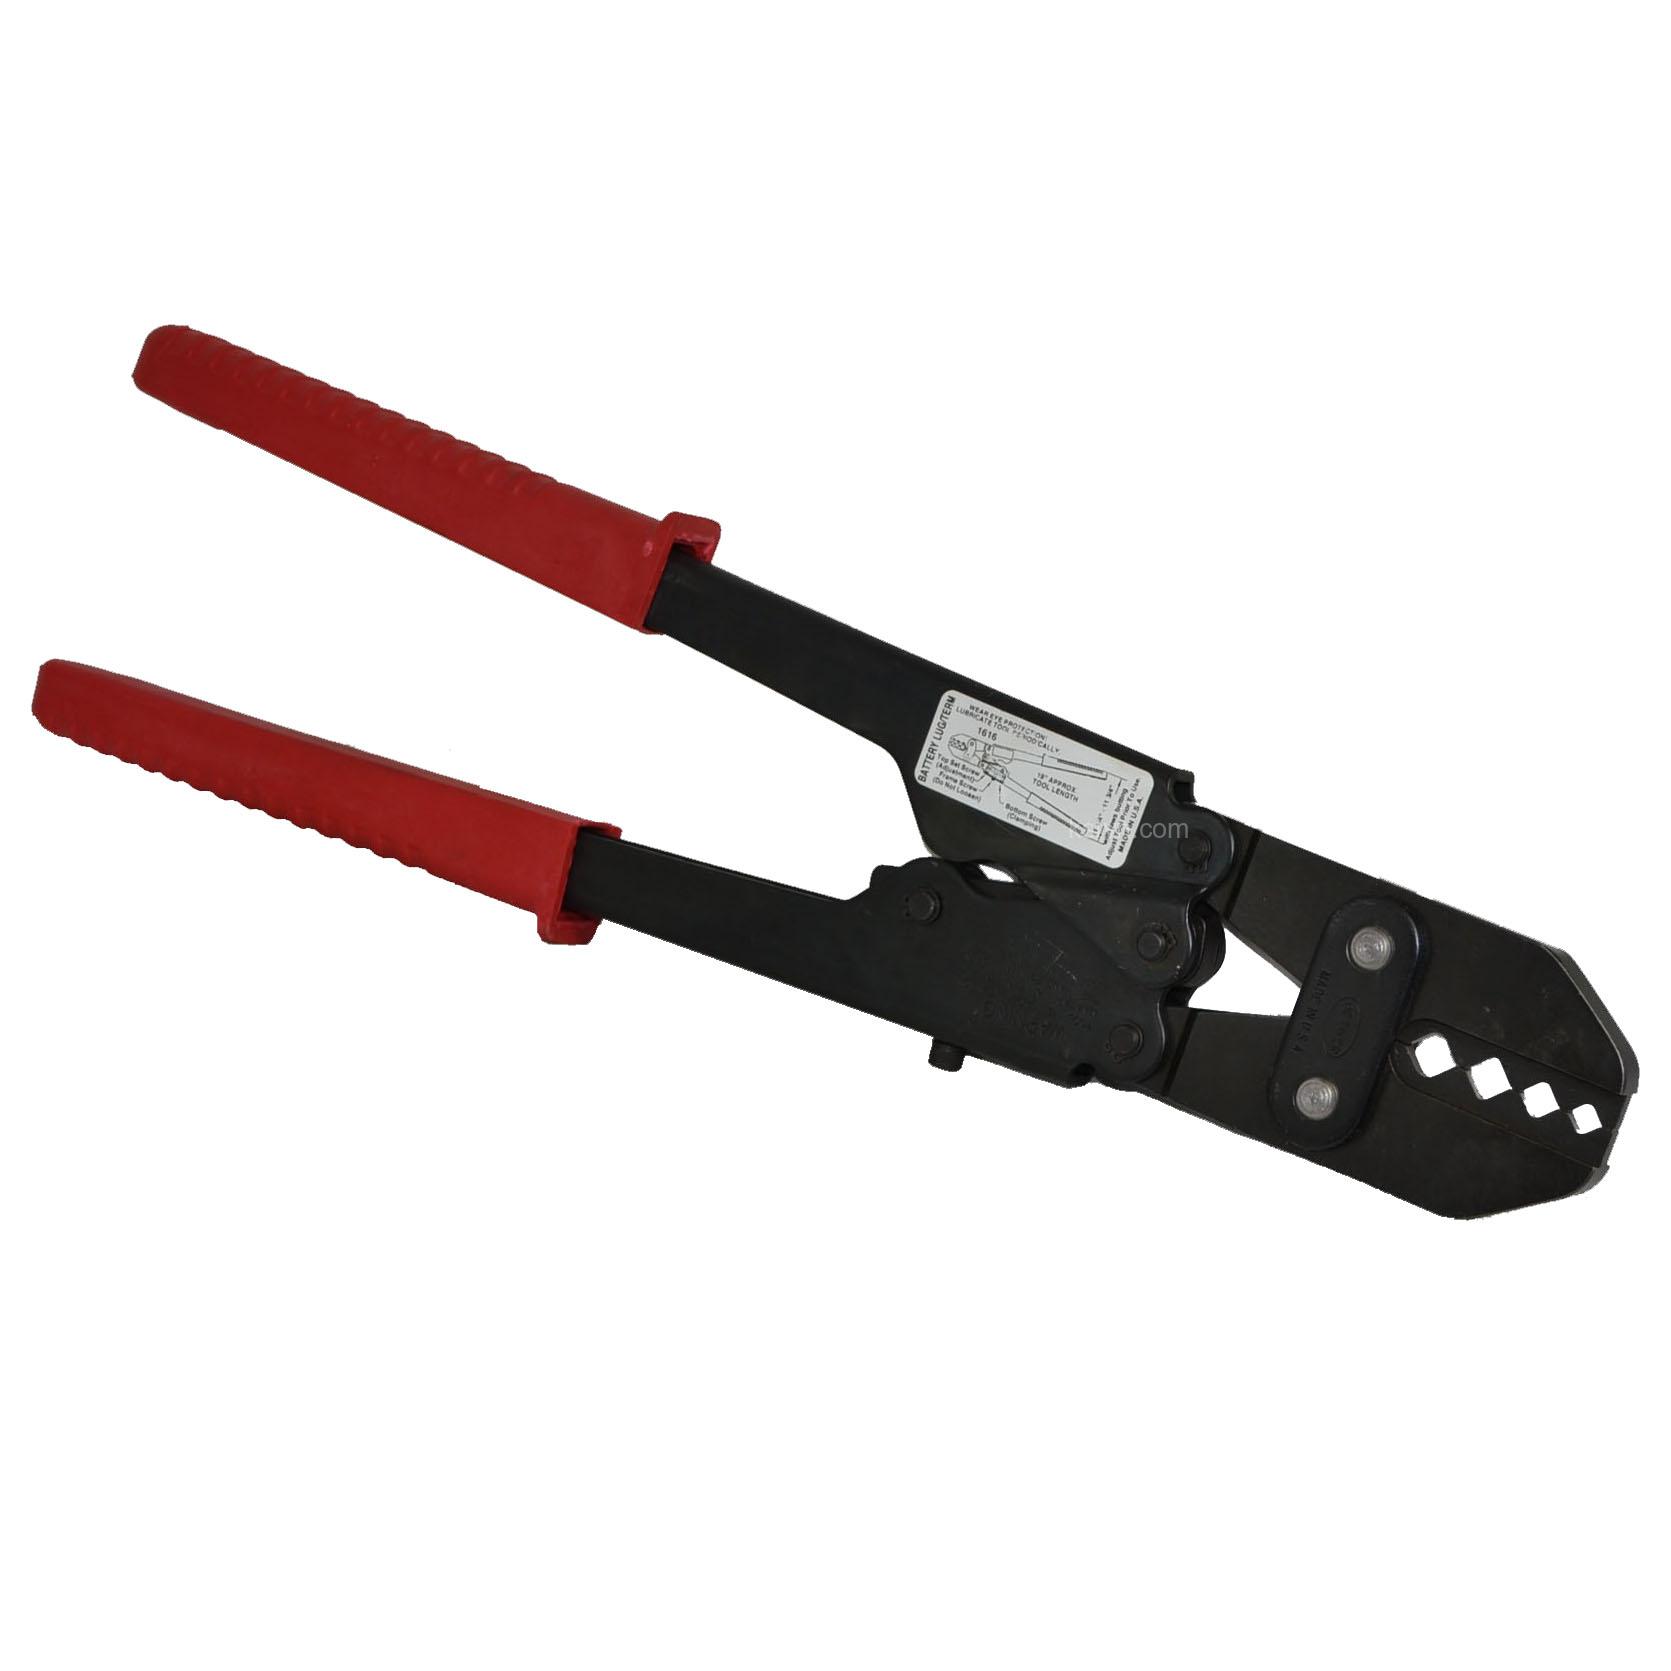 Benefits of utilizing a terminal lug crimper in your electrical projects